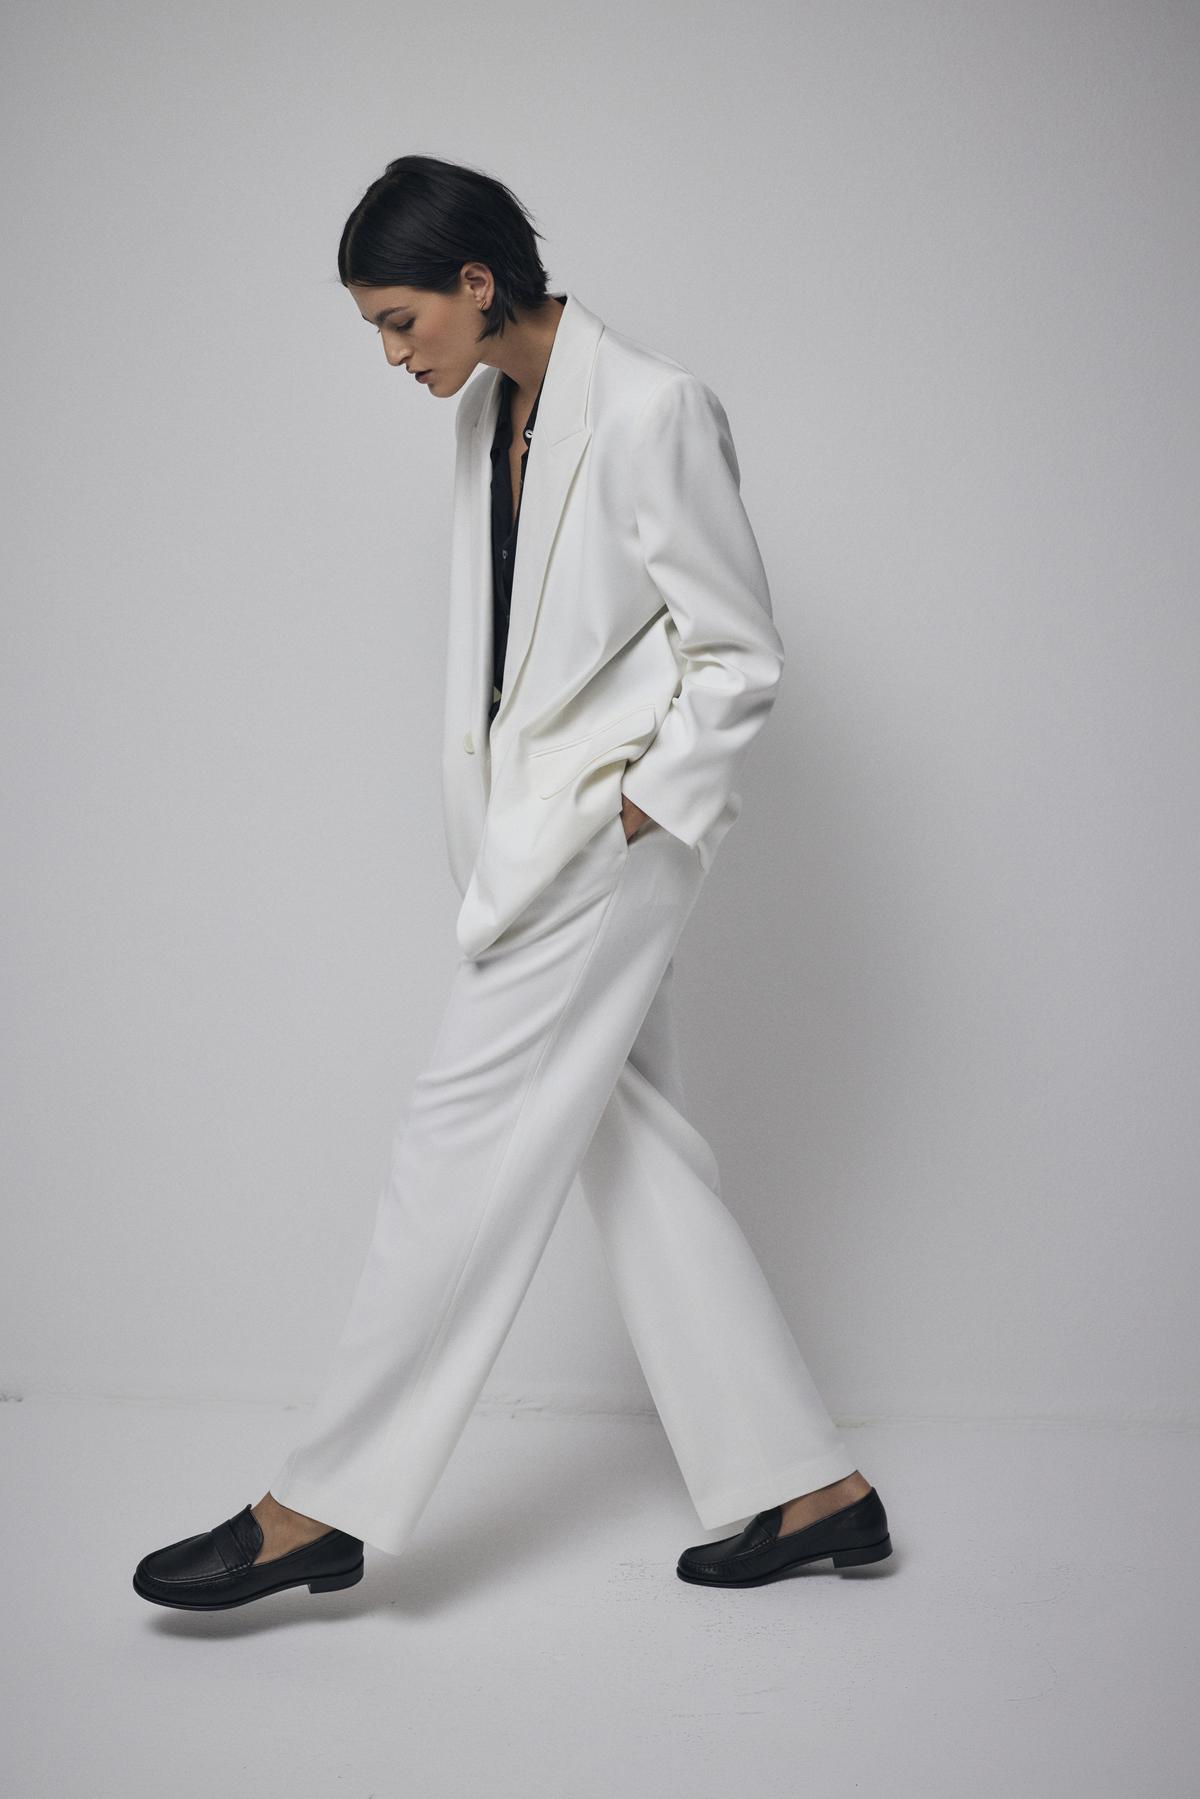 A woman donning a white suit, made of suiting fabric, paired with black shoes.
Product Name: BUNDY PANT
Brand Name: Velvet by Jenny Graham-36168659206337